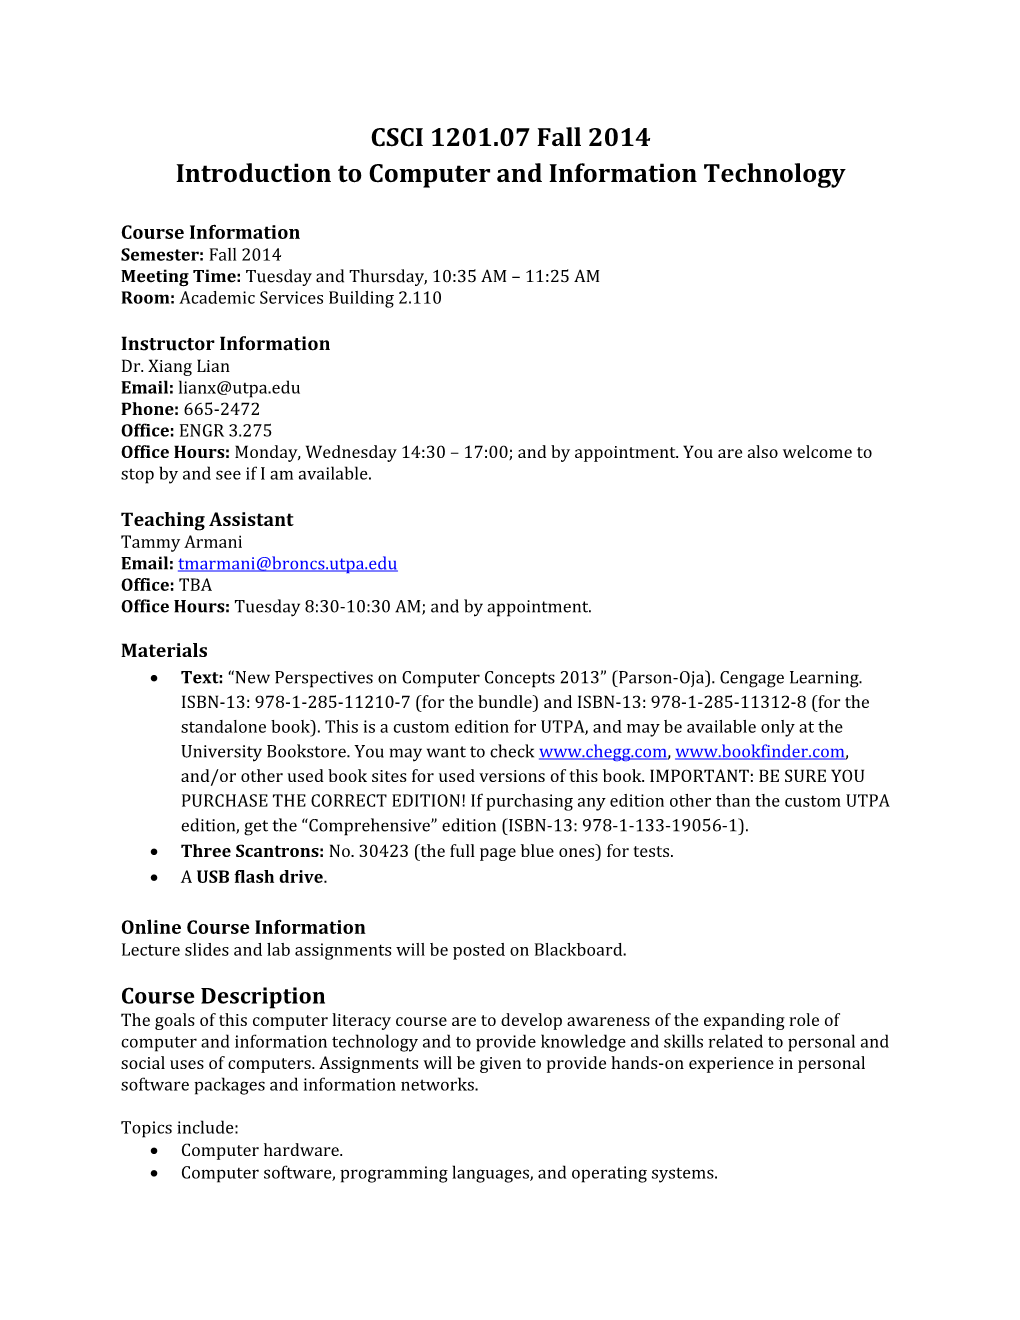 Introduction to Computer and Information Technology